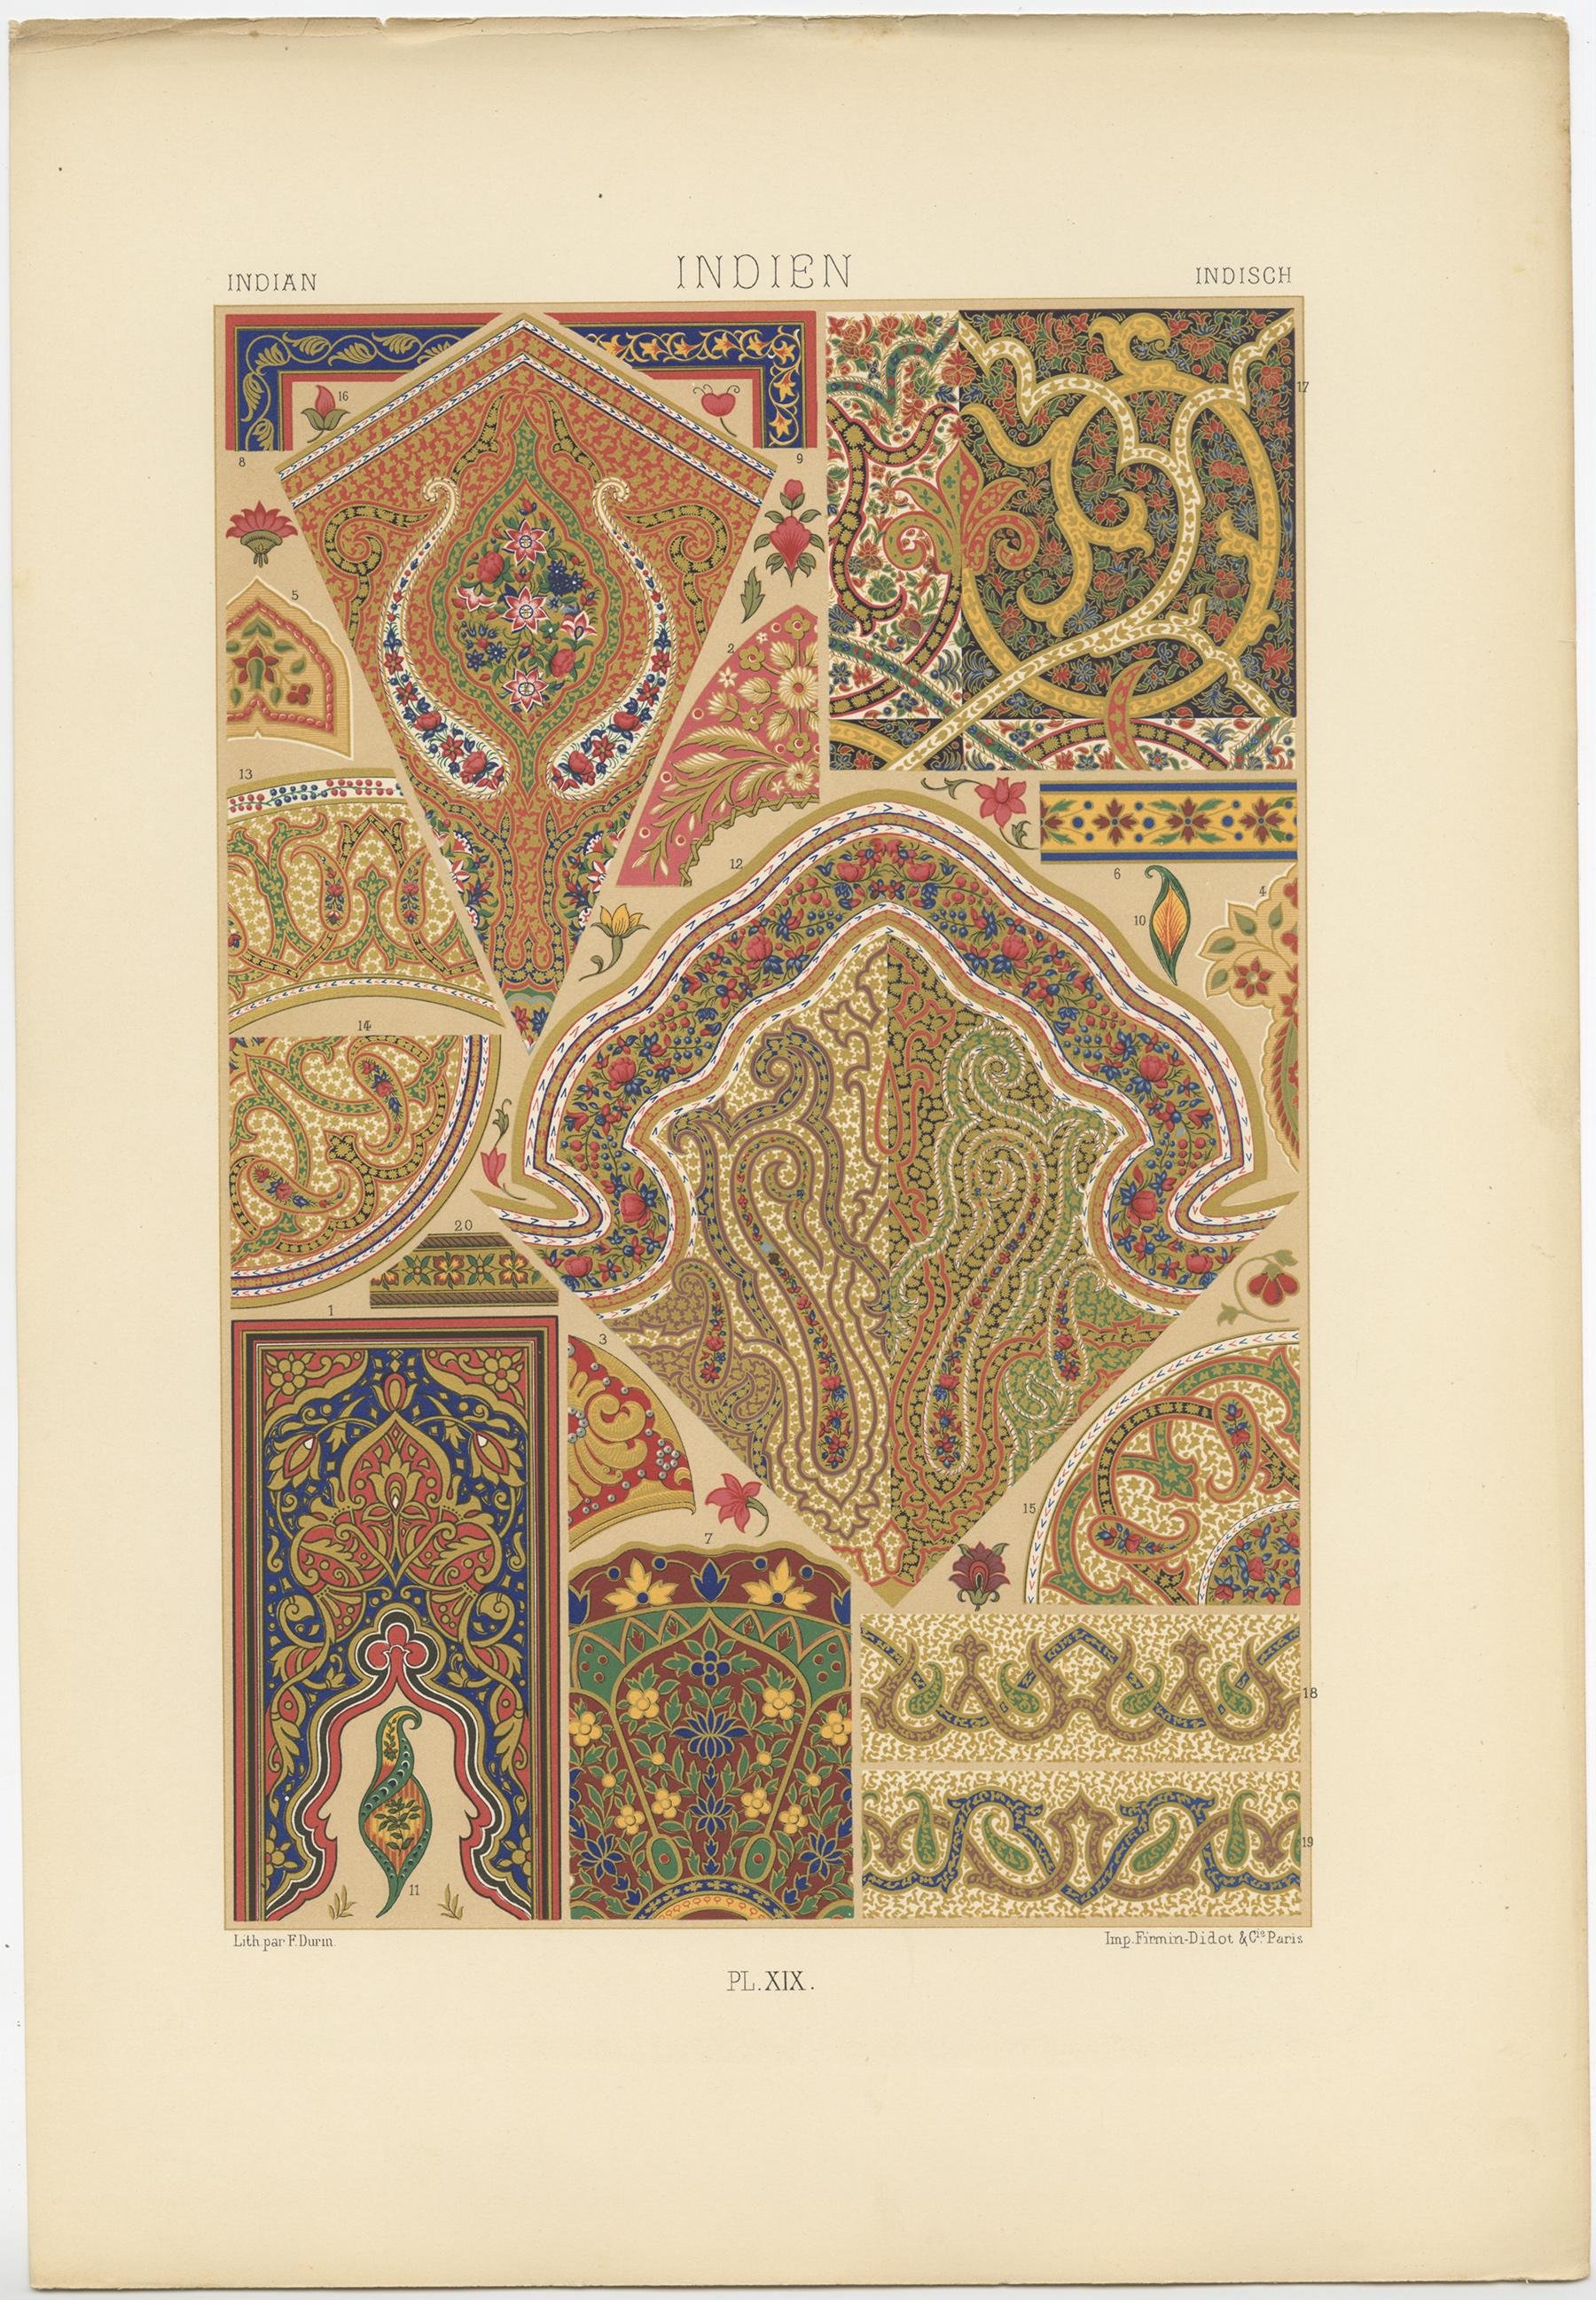 Antique print titled 'Indian - Indien - Indisch'. Chromolithograph of Indian ornaments and decorative arts. This print originates from 'l'Ornement Polychrome' by Auguste Racinet. Published circa 1890.